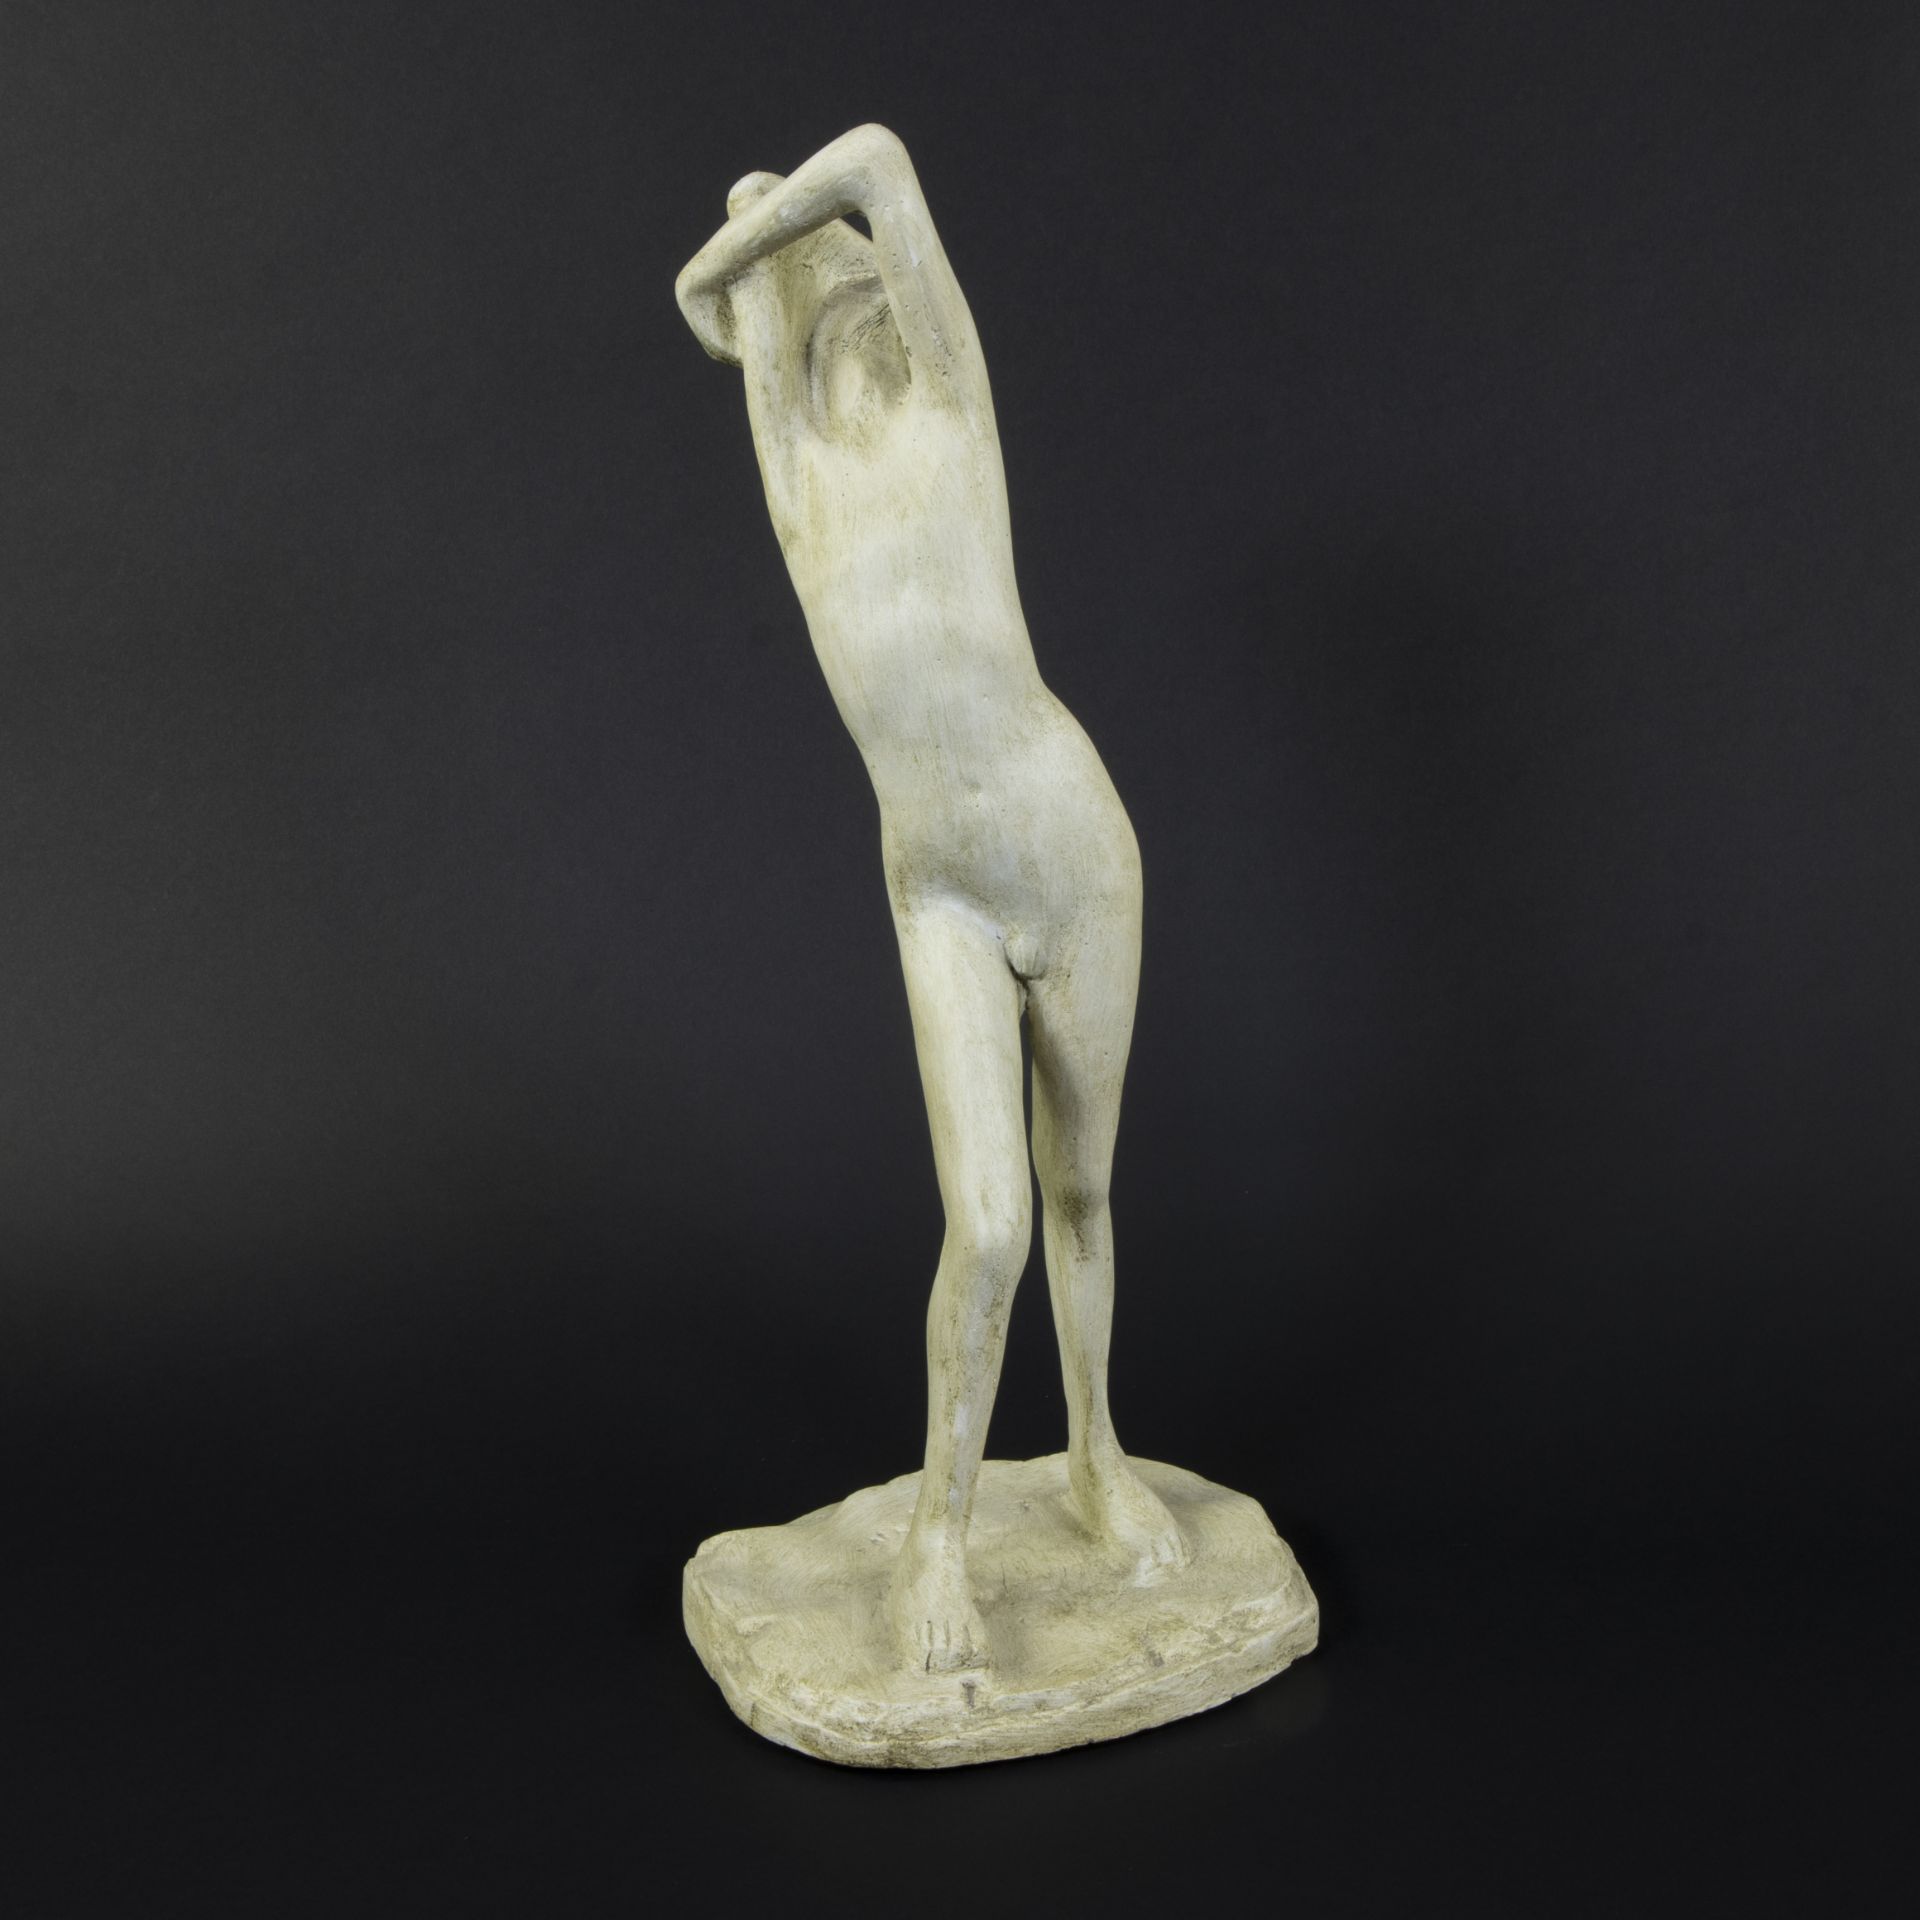 George MINNE (1866-1941), patinated plaster Adolescent, signed